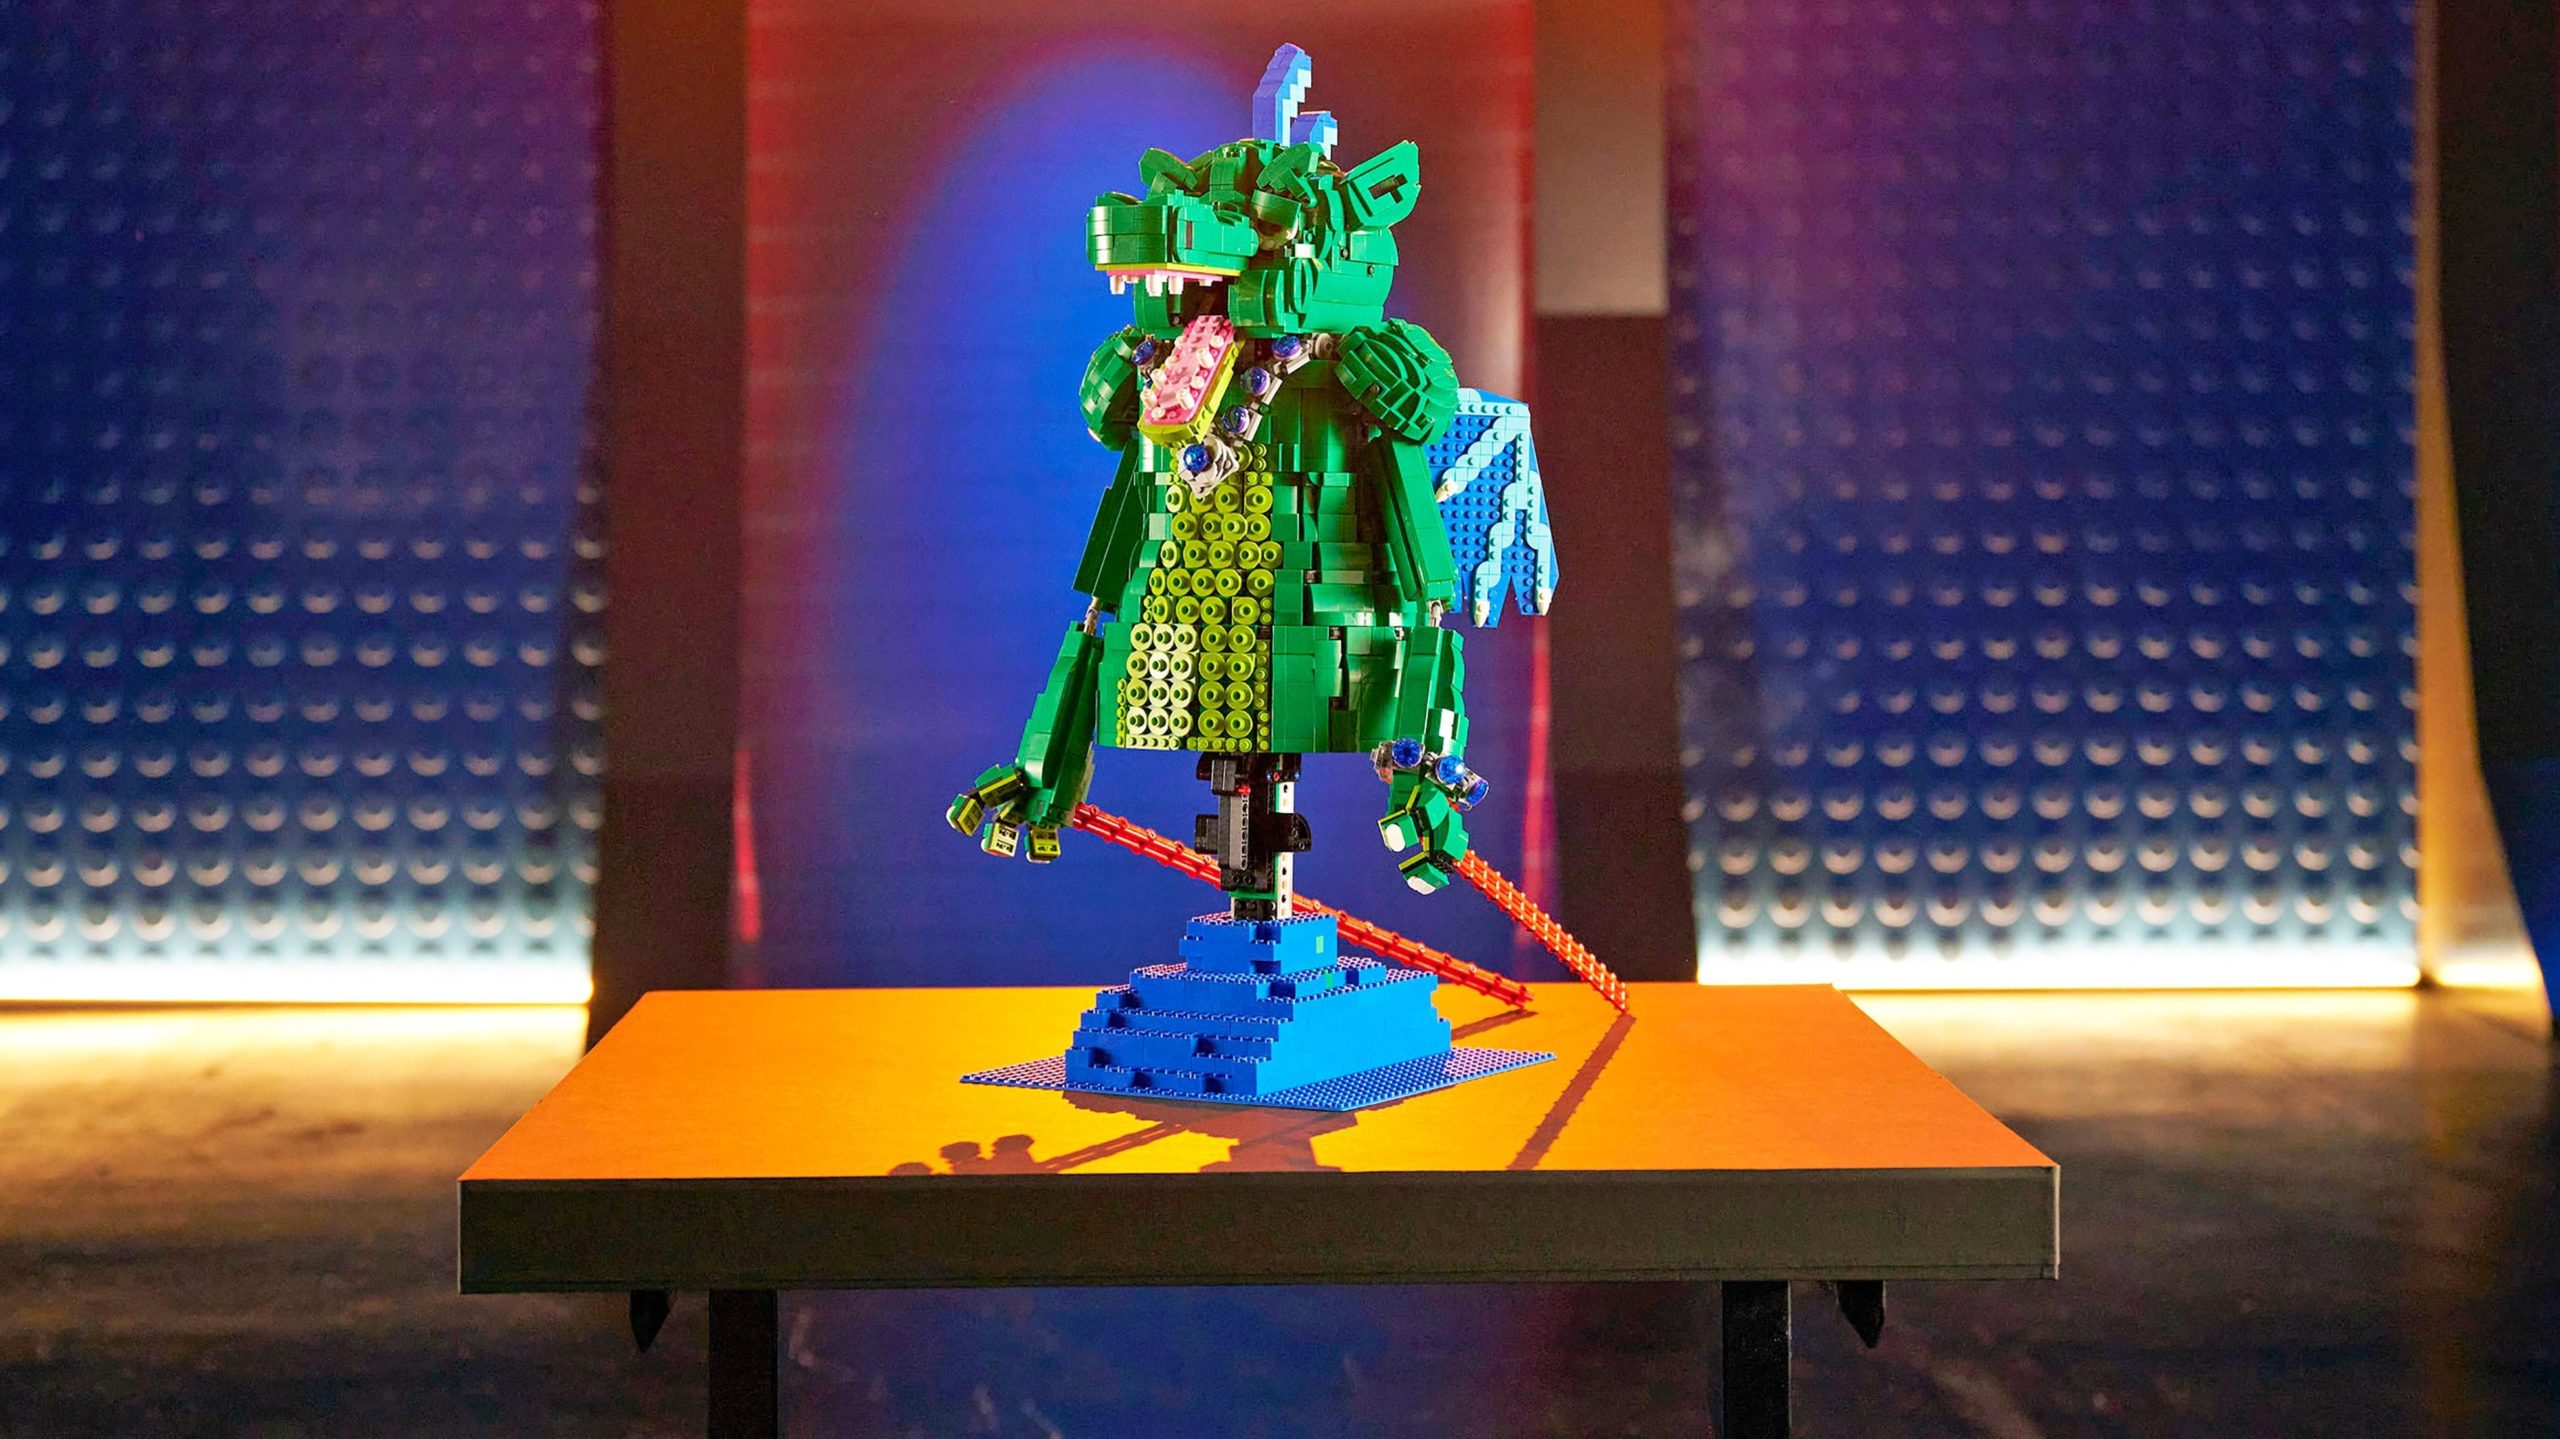 Lego Masters Season 2 Winners Tell Us About the Builds, the Bricks, and Sweating Bullets